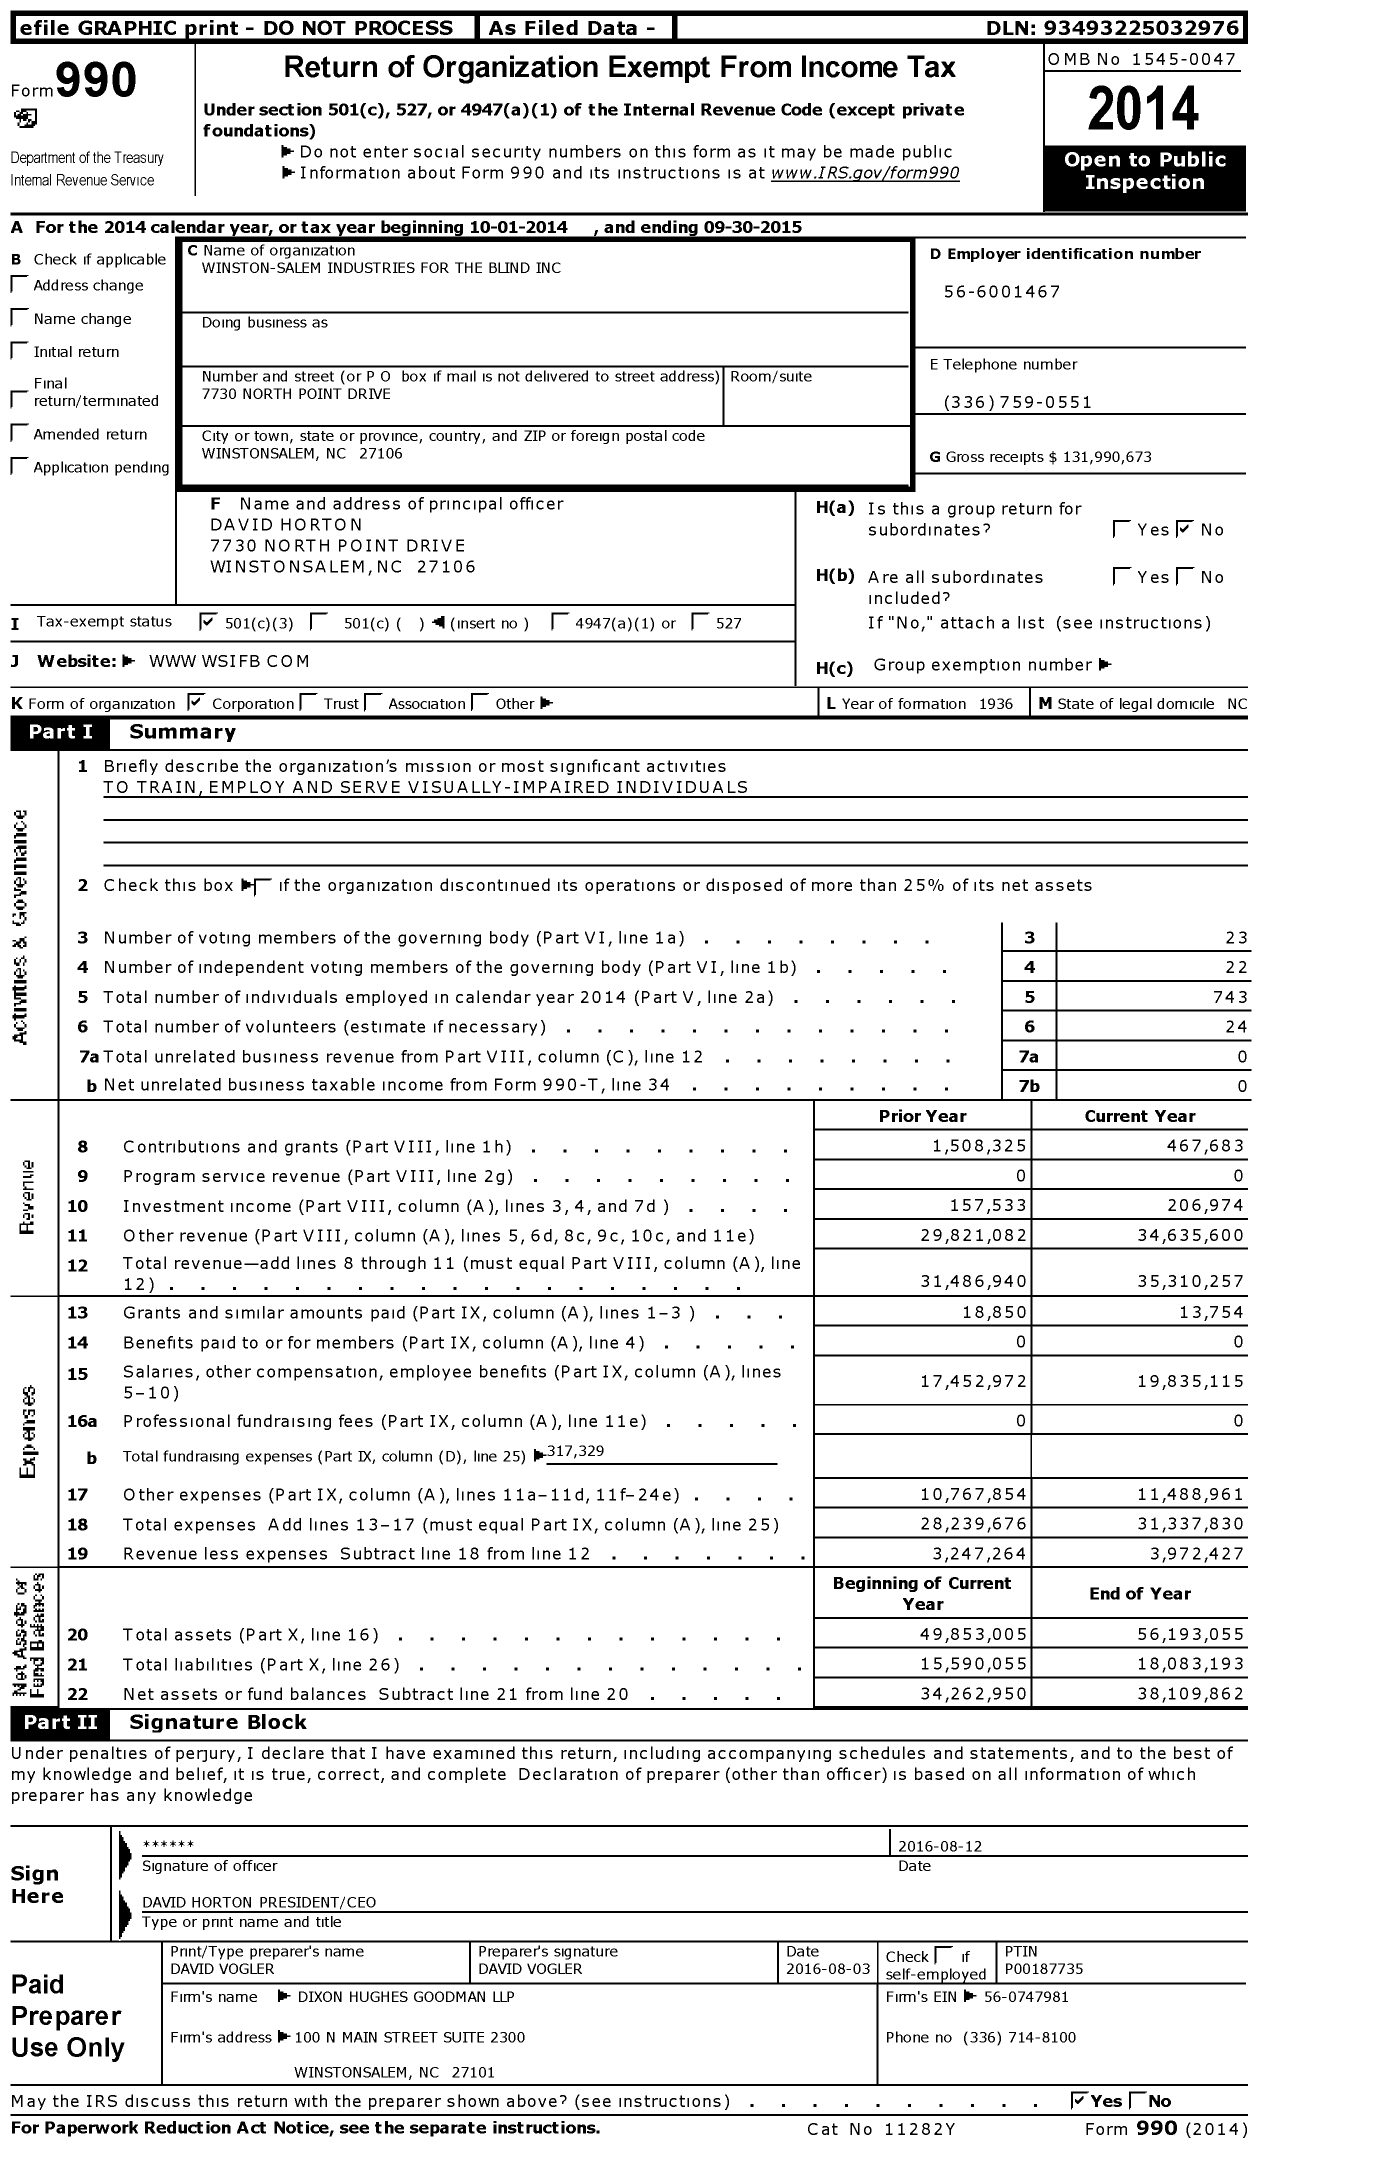 Image of first page of 2014 Form 990 for Ifb Solutions (IFB)